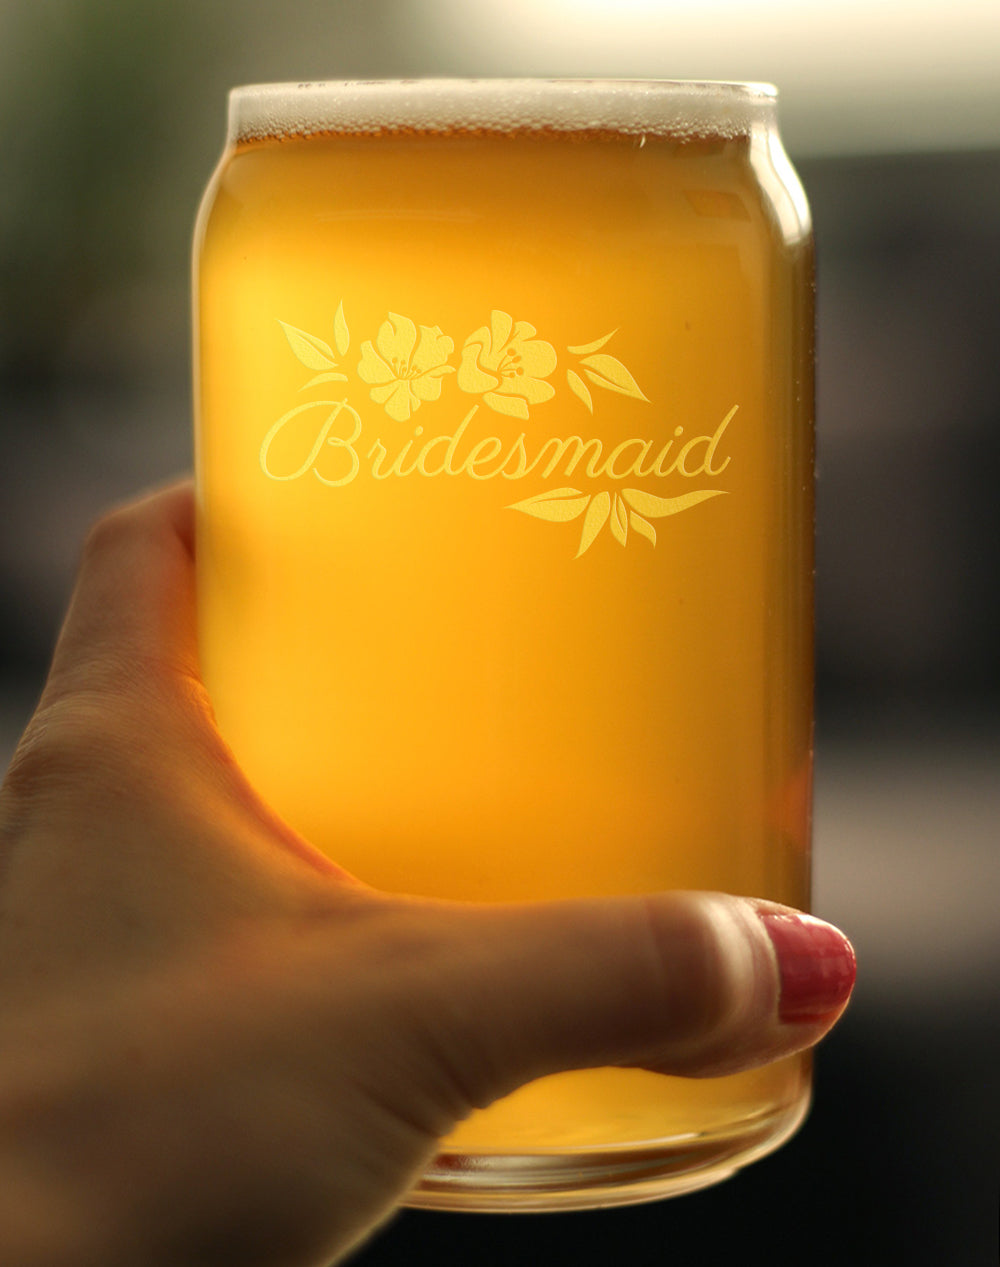 Bridesmaid Beer Can Pint Glass - Bridesmaids Proposal Gifts - Unique Engraved Wedding Cup Gift